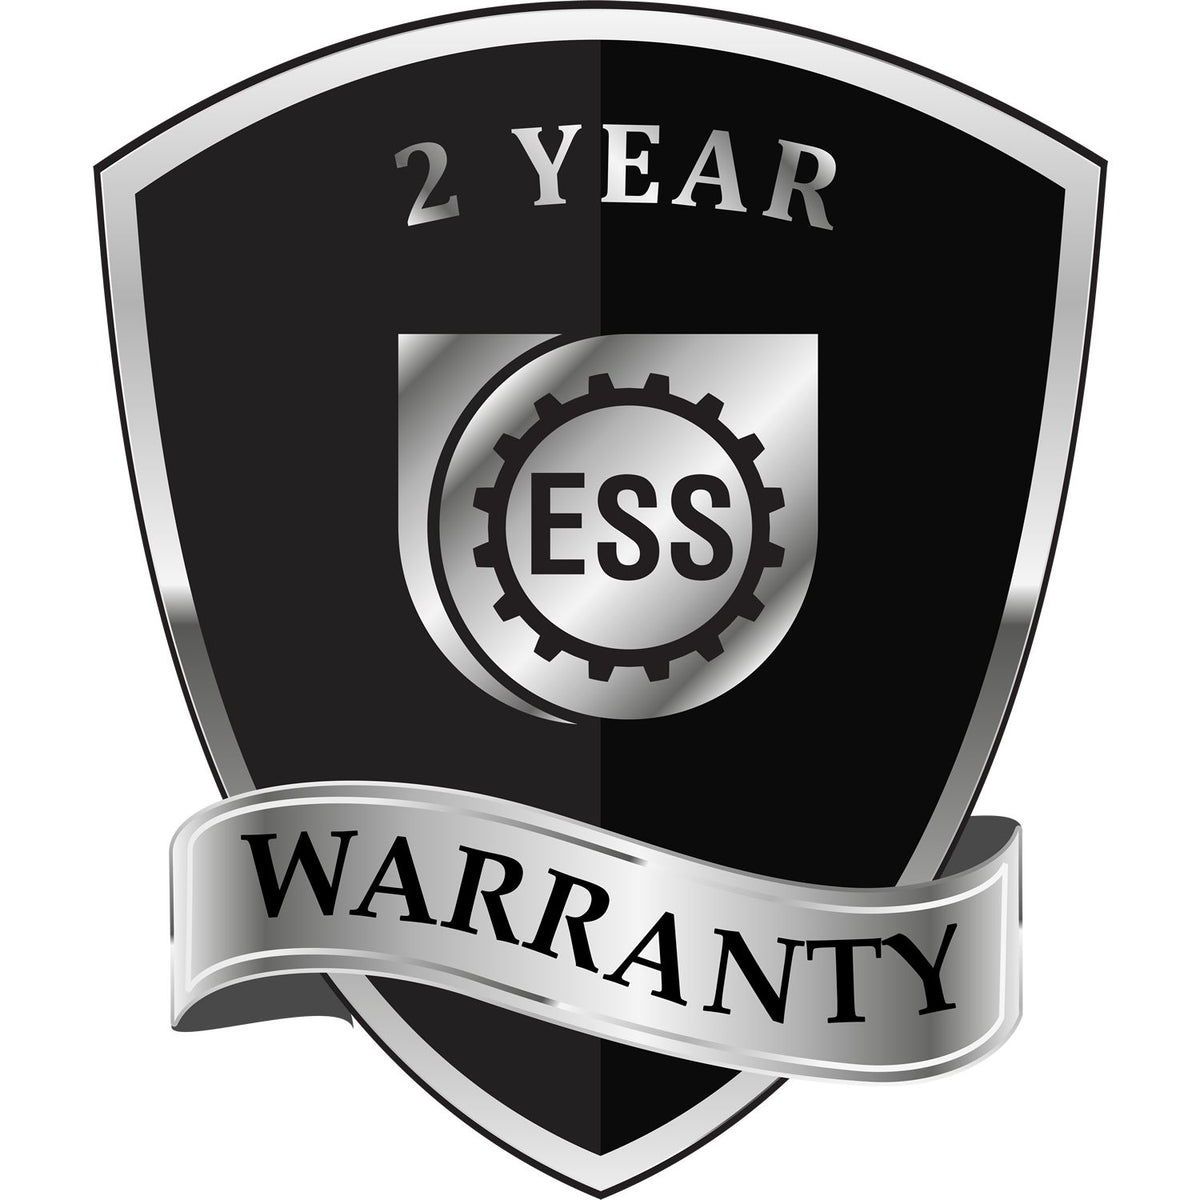 A black and silver badge or emblem showing warranty information for the Gift Nevada Architect Seal